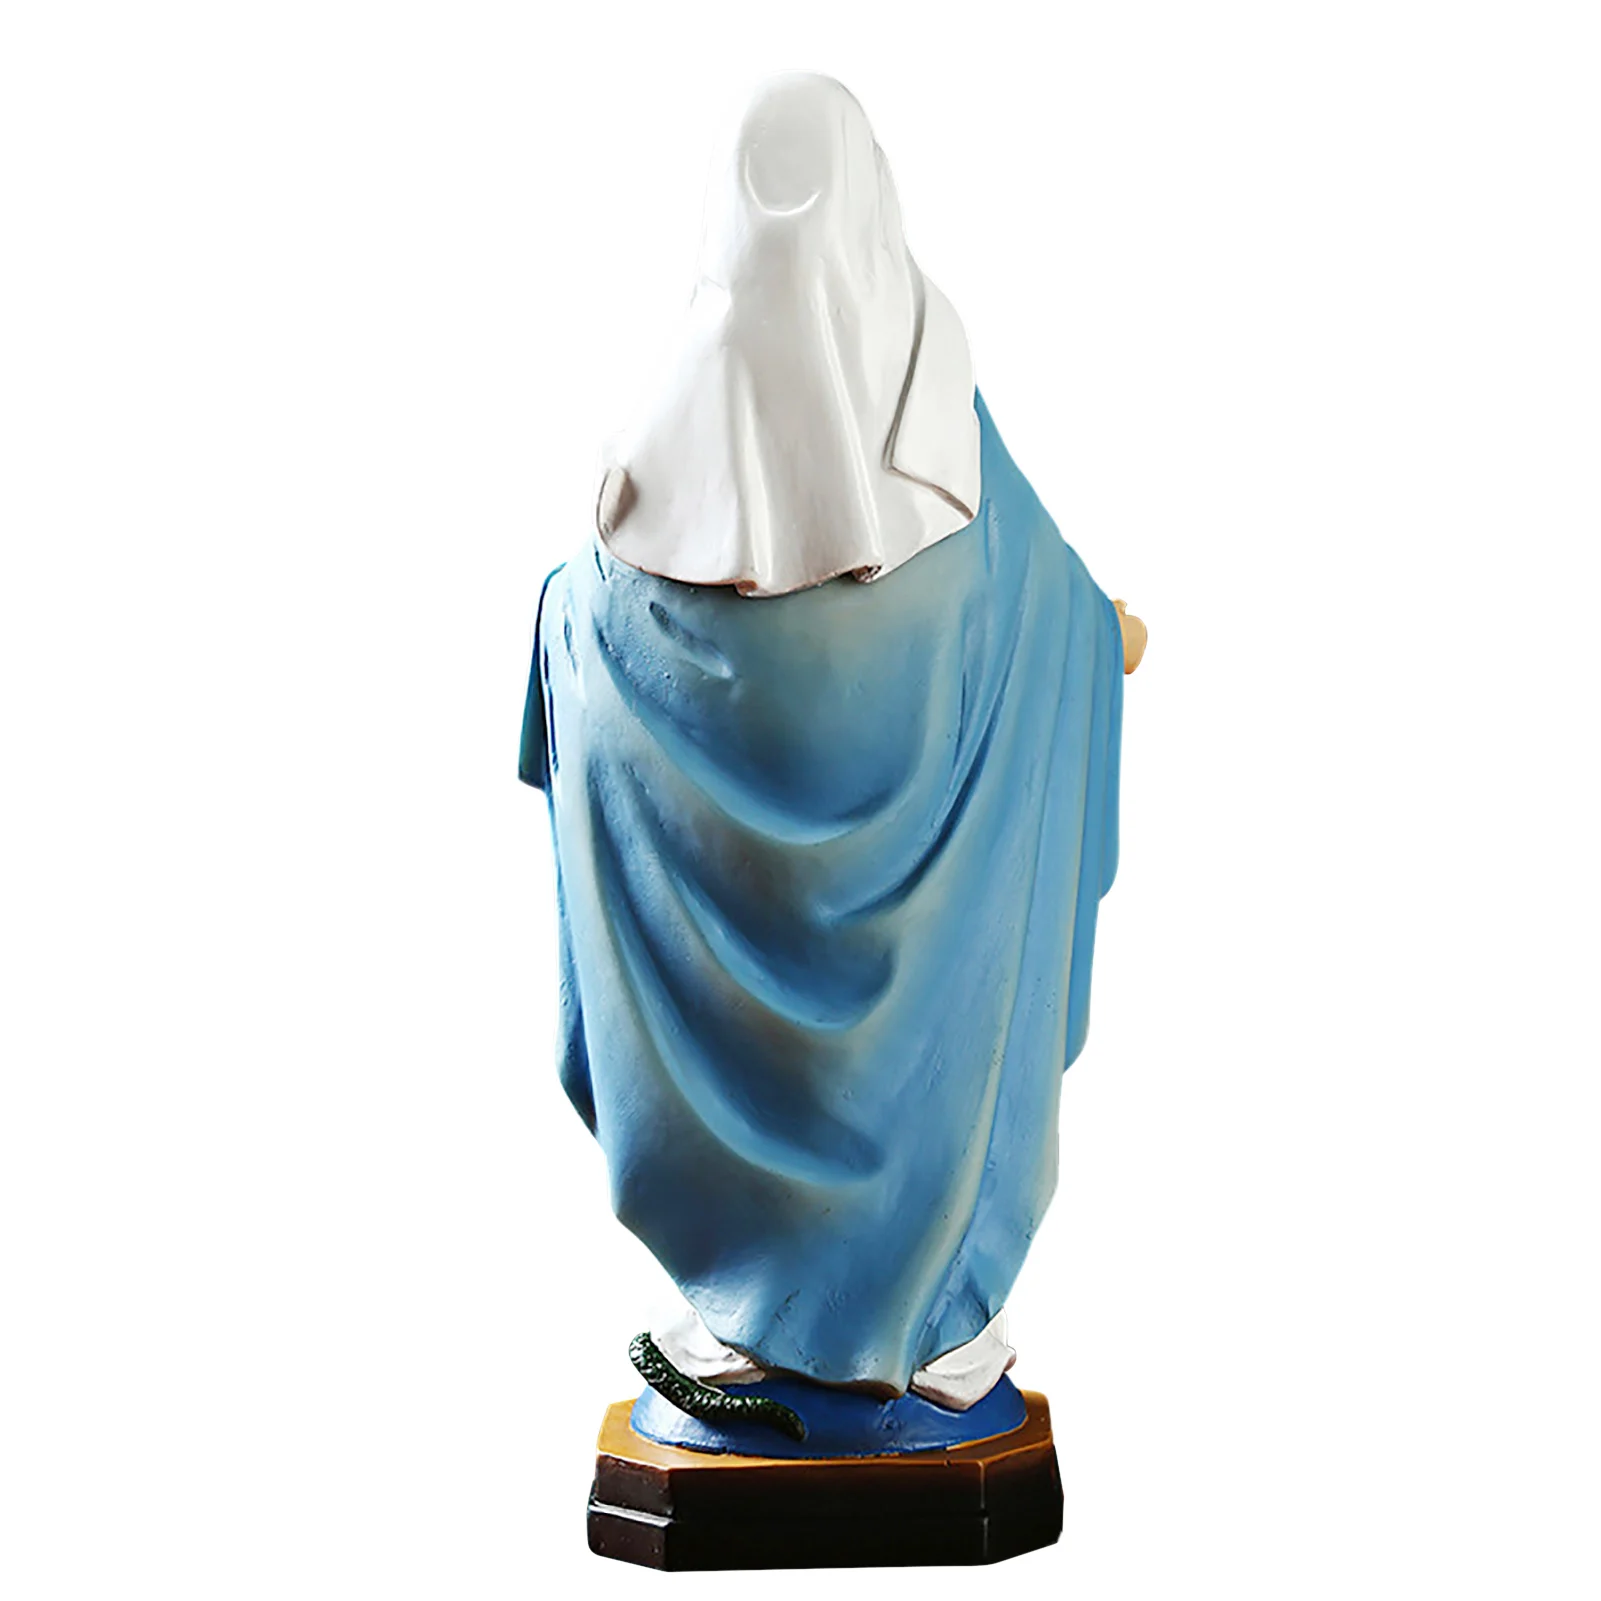 

Our Lady Of Grace Statue 8.8 Virgin Mary Statue Polyresin Craft Statue Catholic Religious Sculpture Indoor Outdoor Decor For